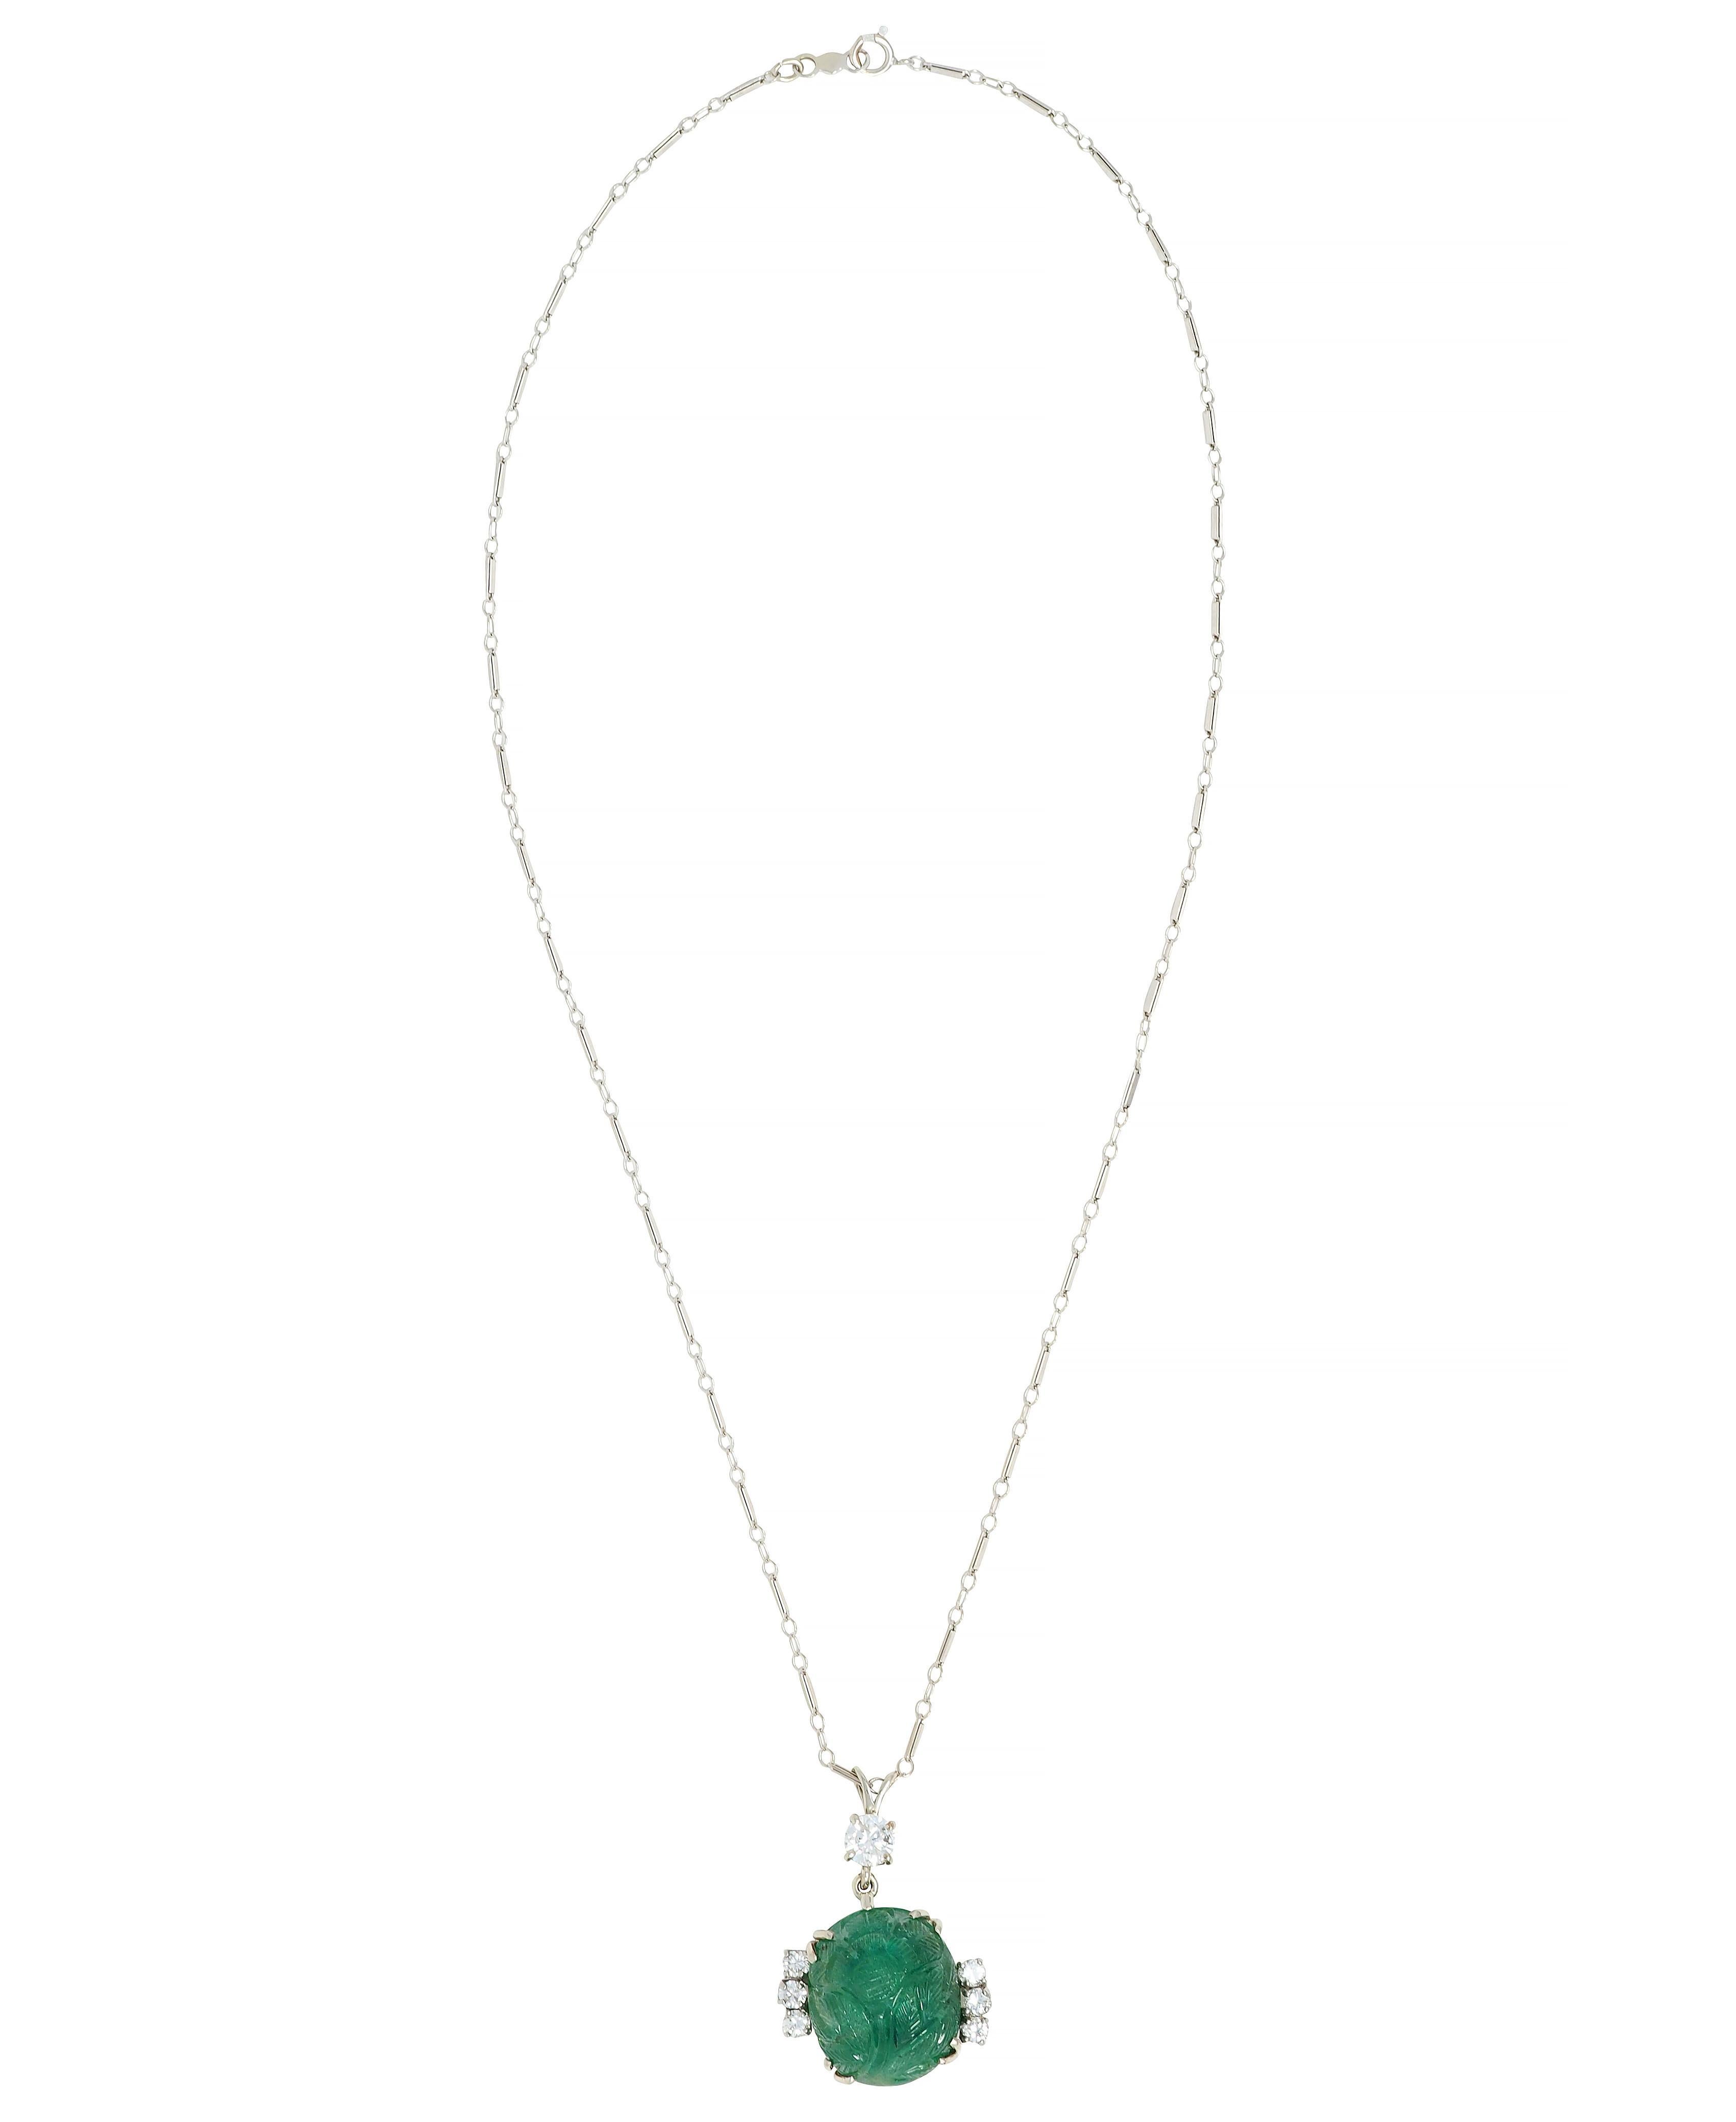 Designed as a fancy bar link chain suspending a pendant centering a carved emerald cabochon
Weighing approximately 20.18 carats total - translucent light to dark green in color 
Carved 